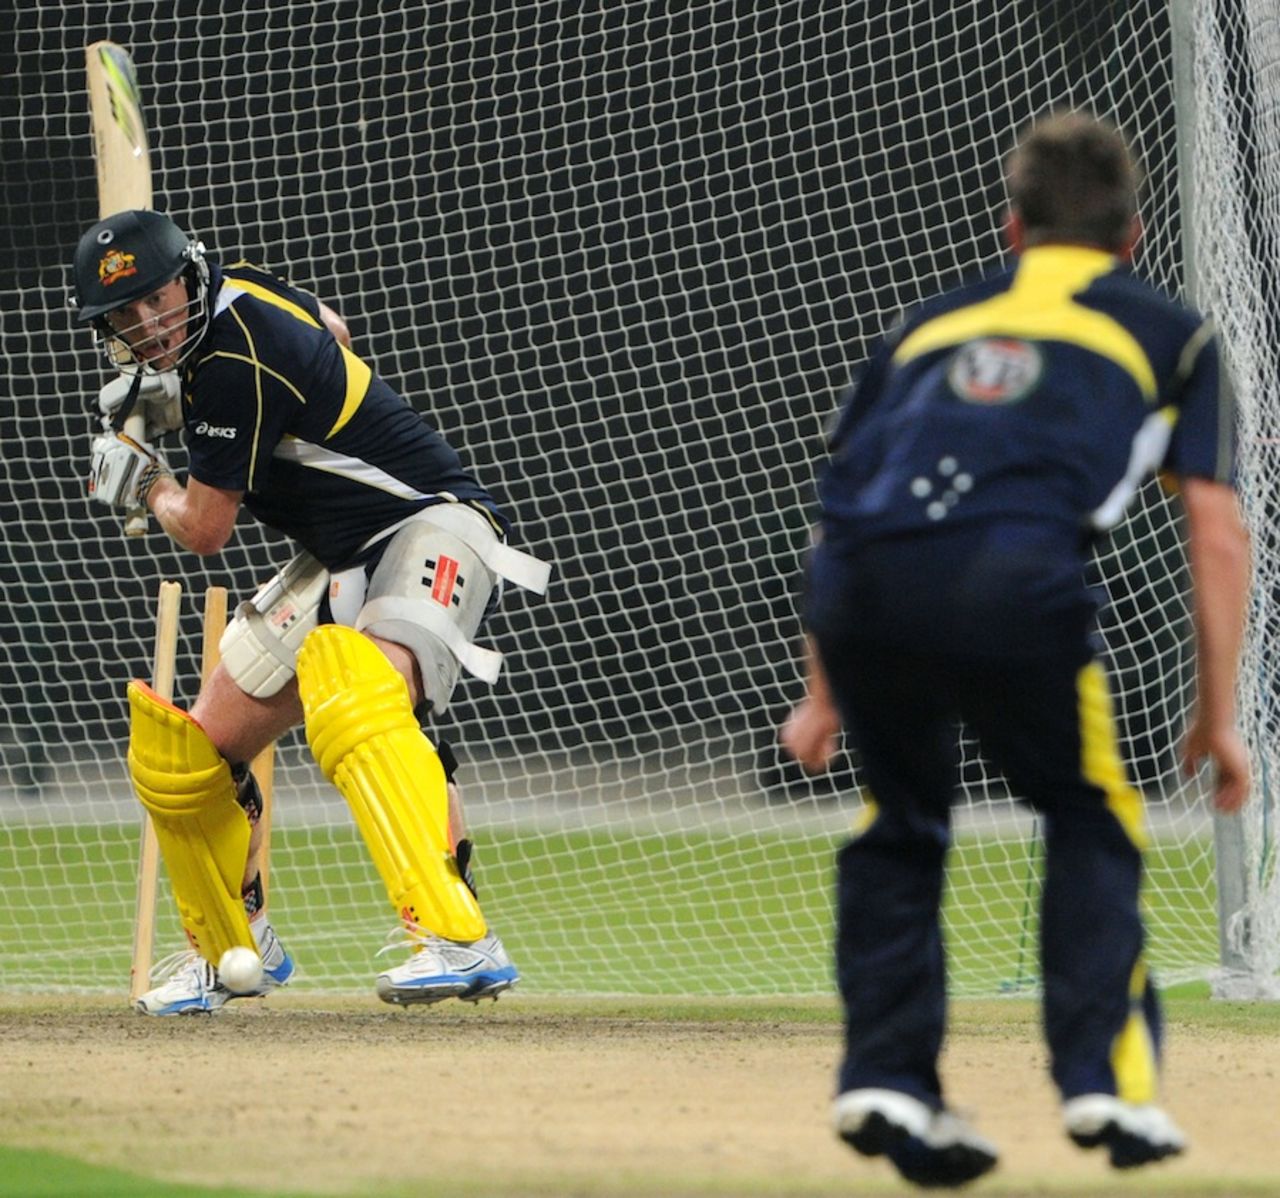 George Bailey bats during practice, Abu Dhabi, August 30, 2012